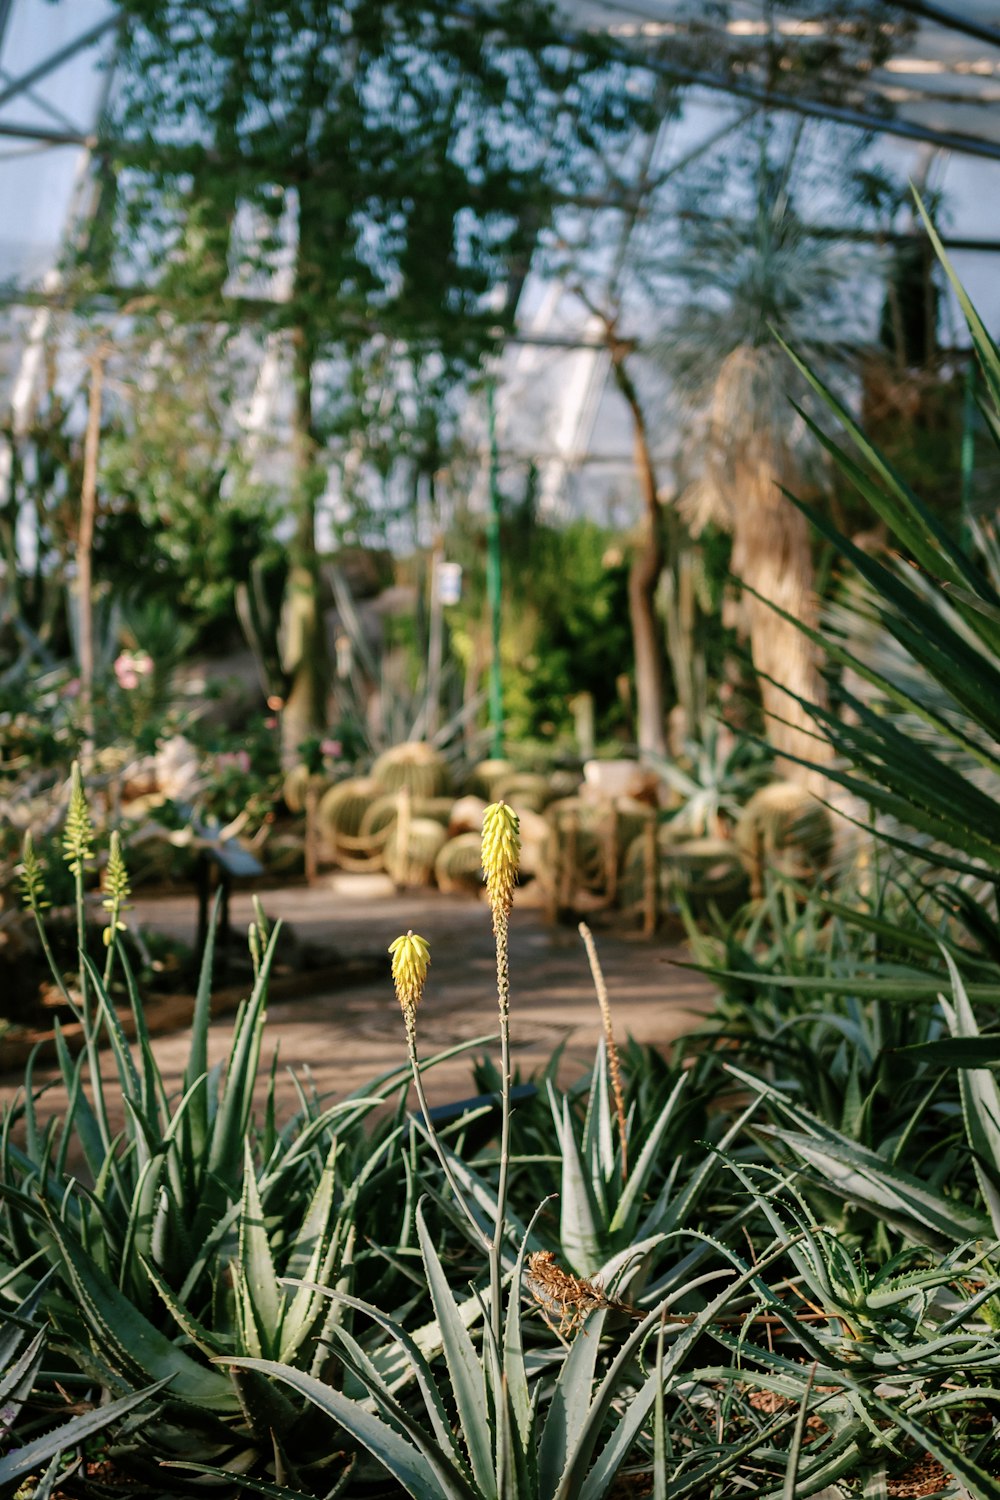 a view of some plants in a greenhouse